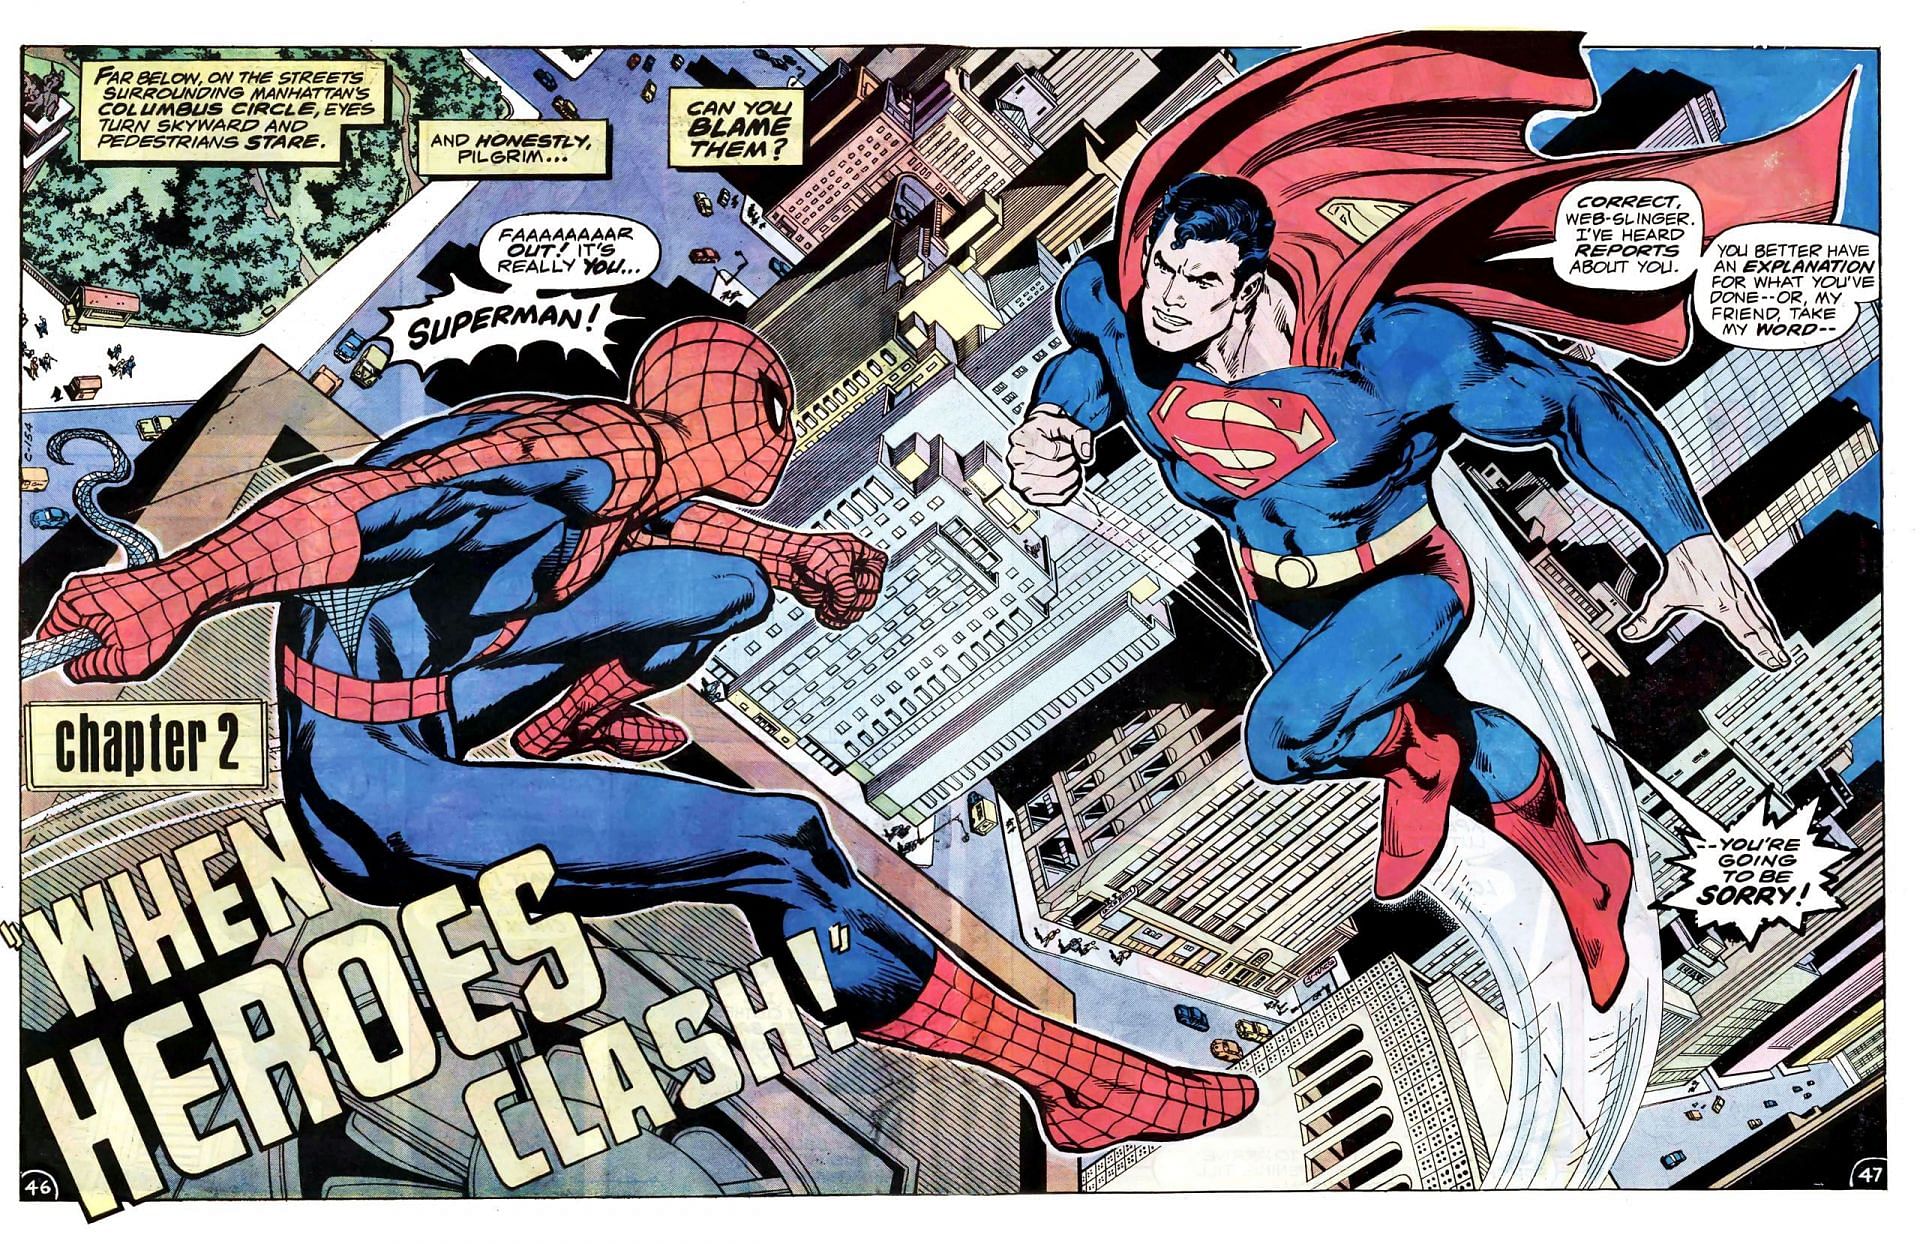 Superman vs. Spider-Man: The Battle of the Century! (Image via DC and Marvel Comics)